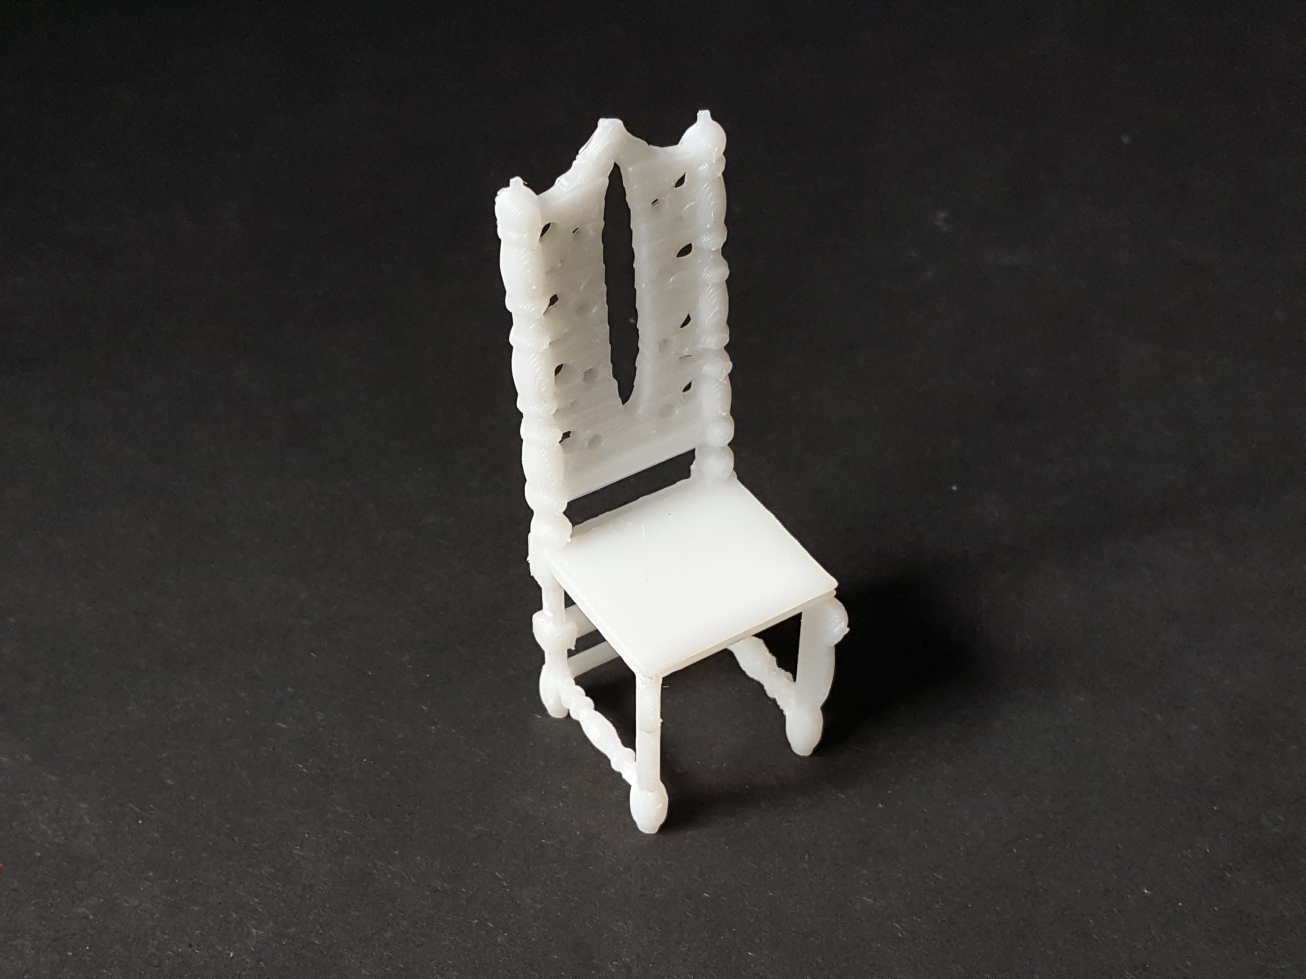 Antique Chair - TinkerCAD